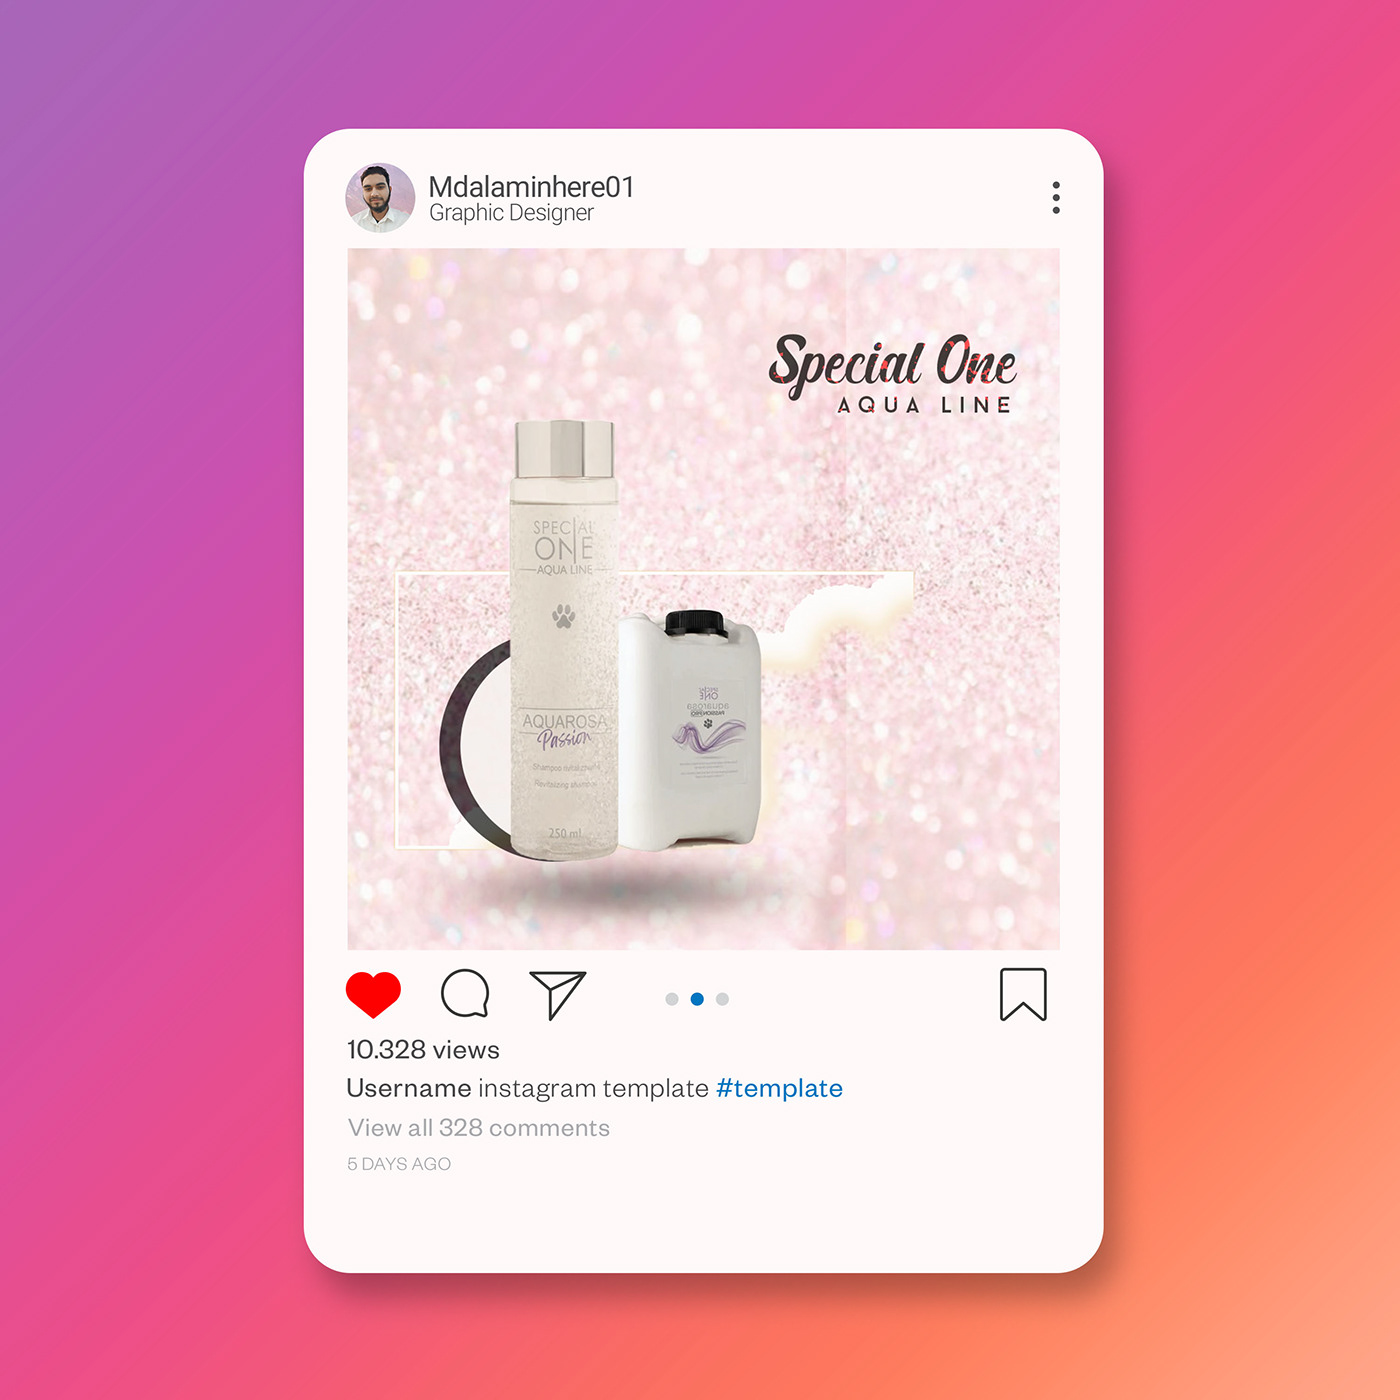 Ad designs Instagram ad post design mdalaminhere01 Product Photography Product promotional ads Promotional Ad Design social media ad design Social media post designs